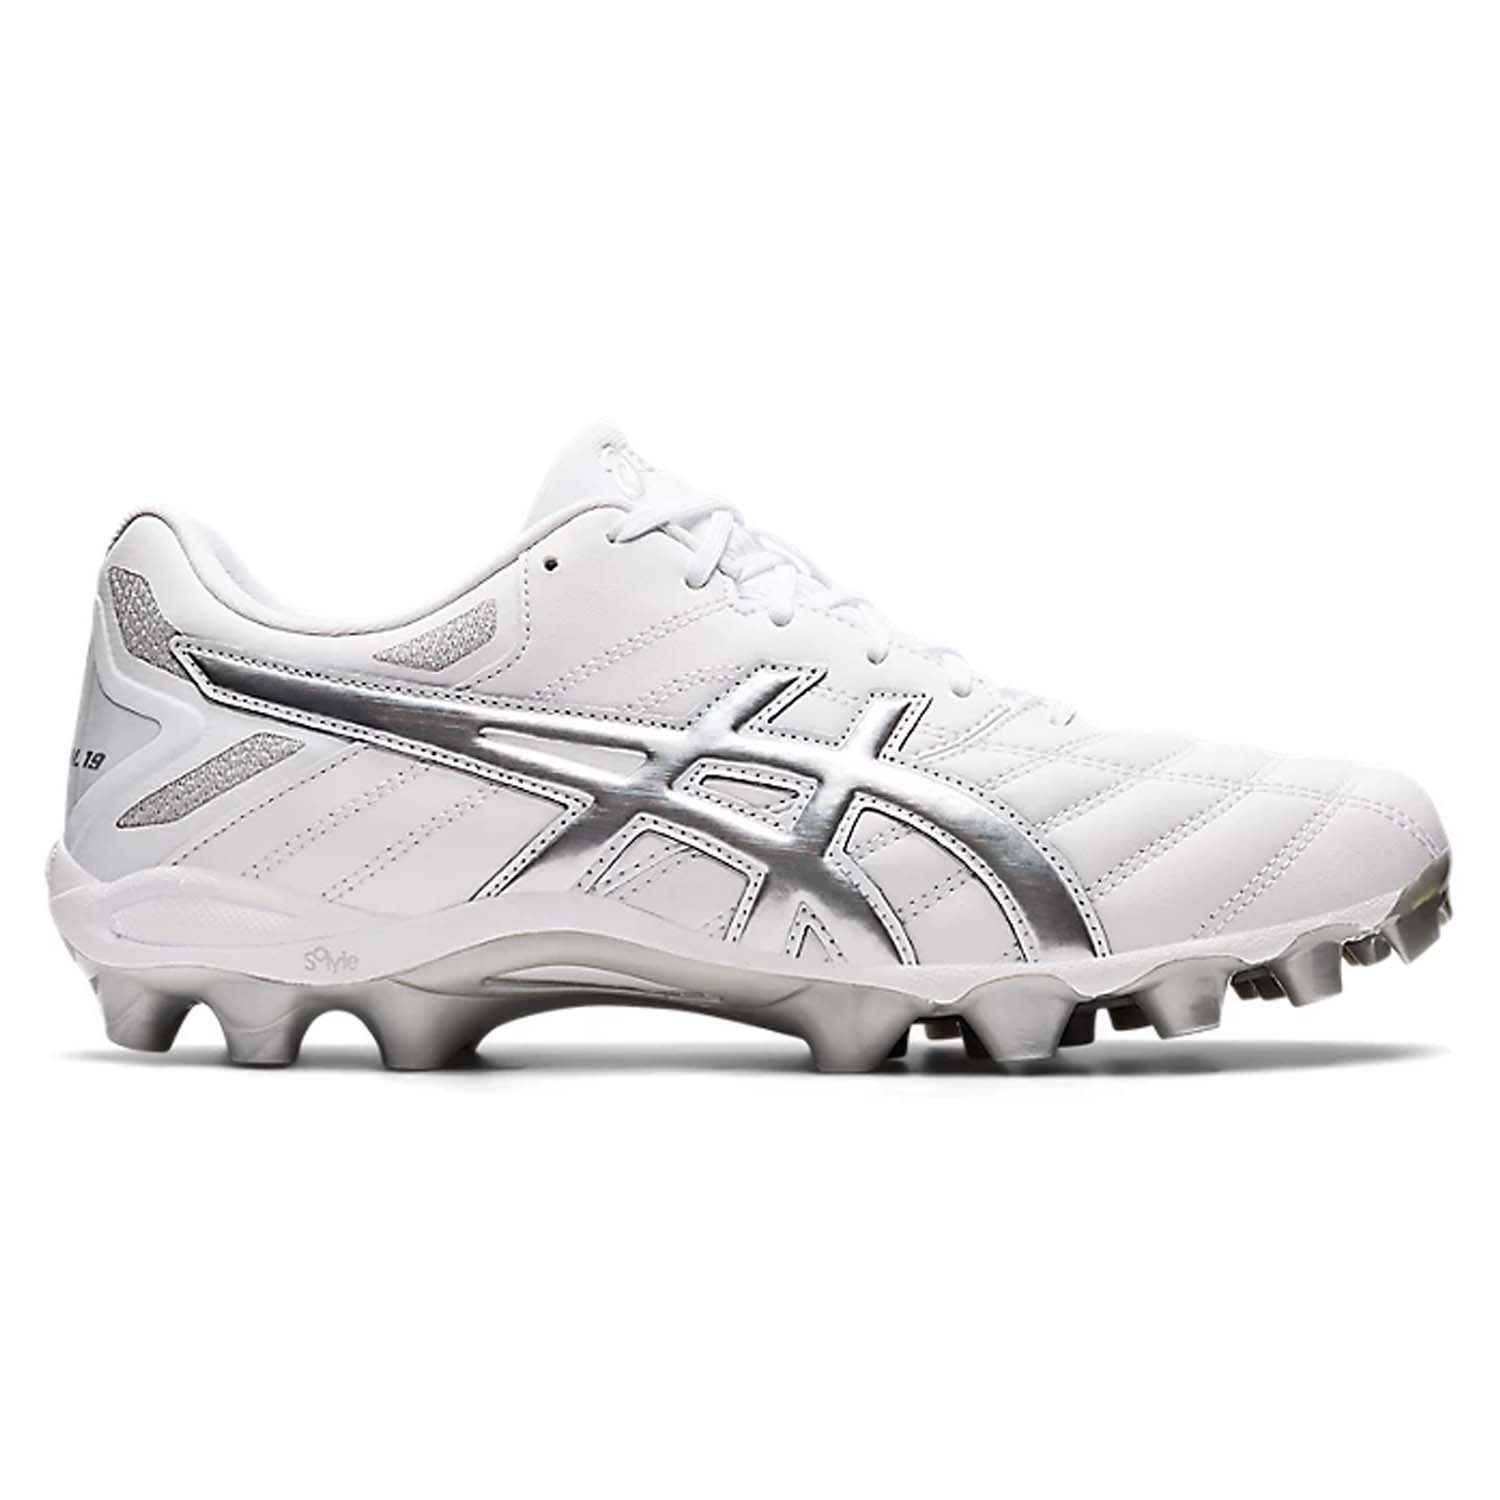 Asics SNR Gel-Lethal 19 Football Boots: White/Pure Silver | Mike Pawley ...